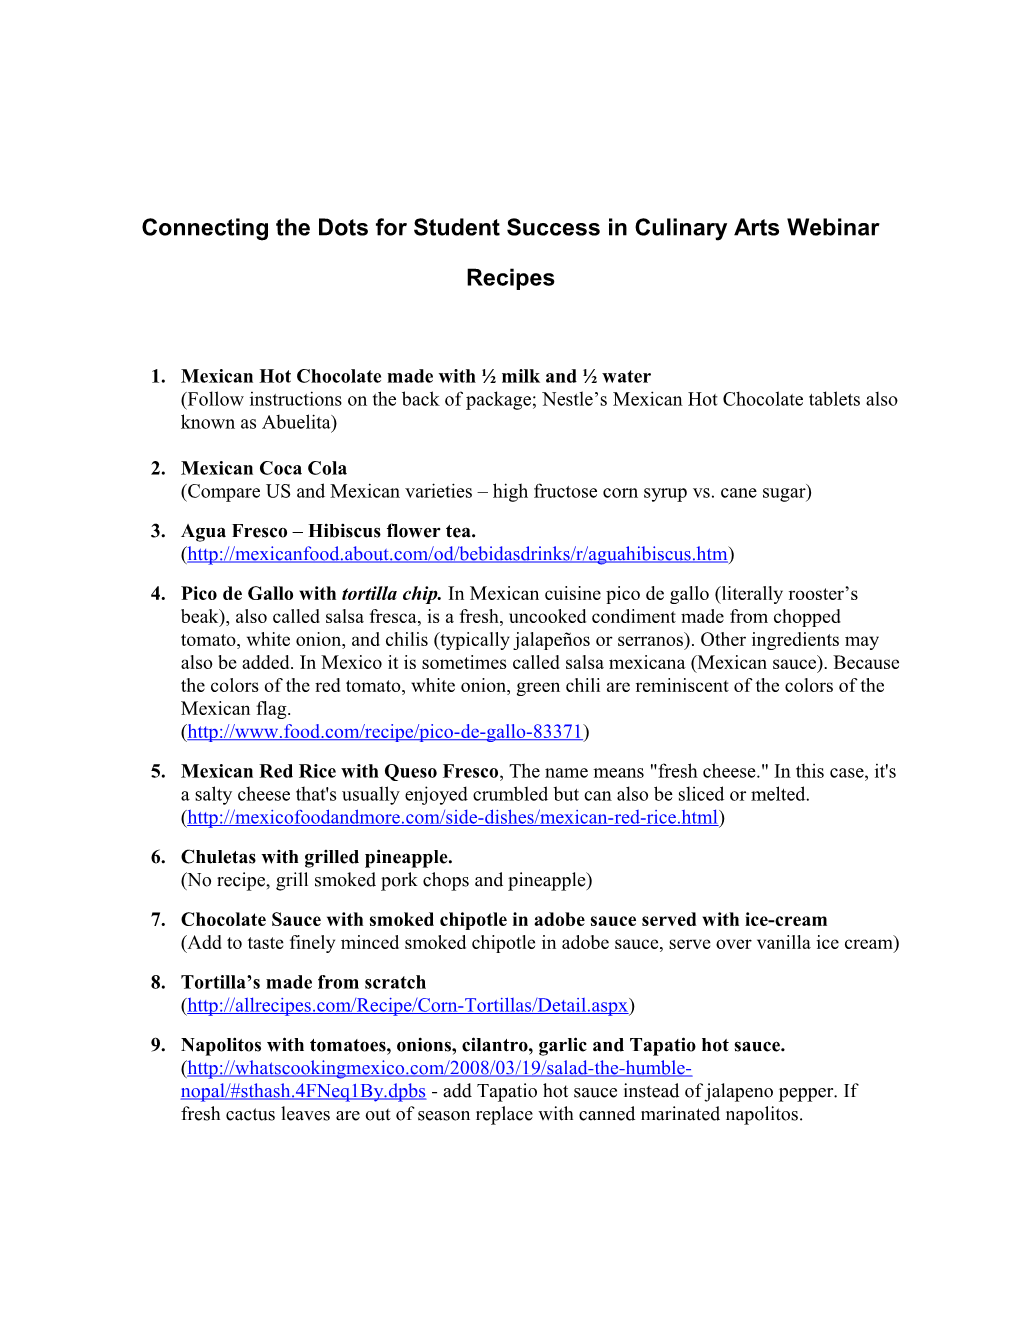 Connecting the Dots for Student Success in Culinary Arts Webinar